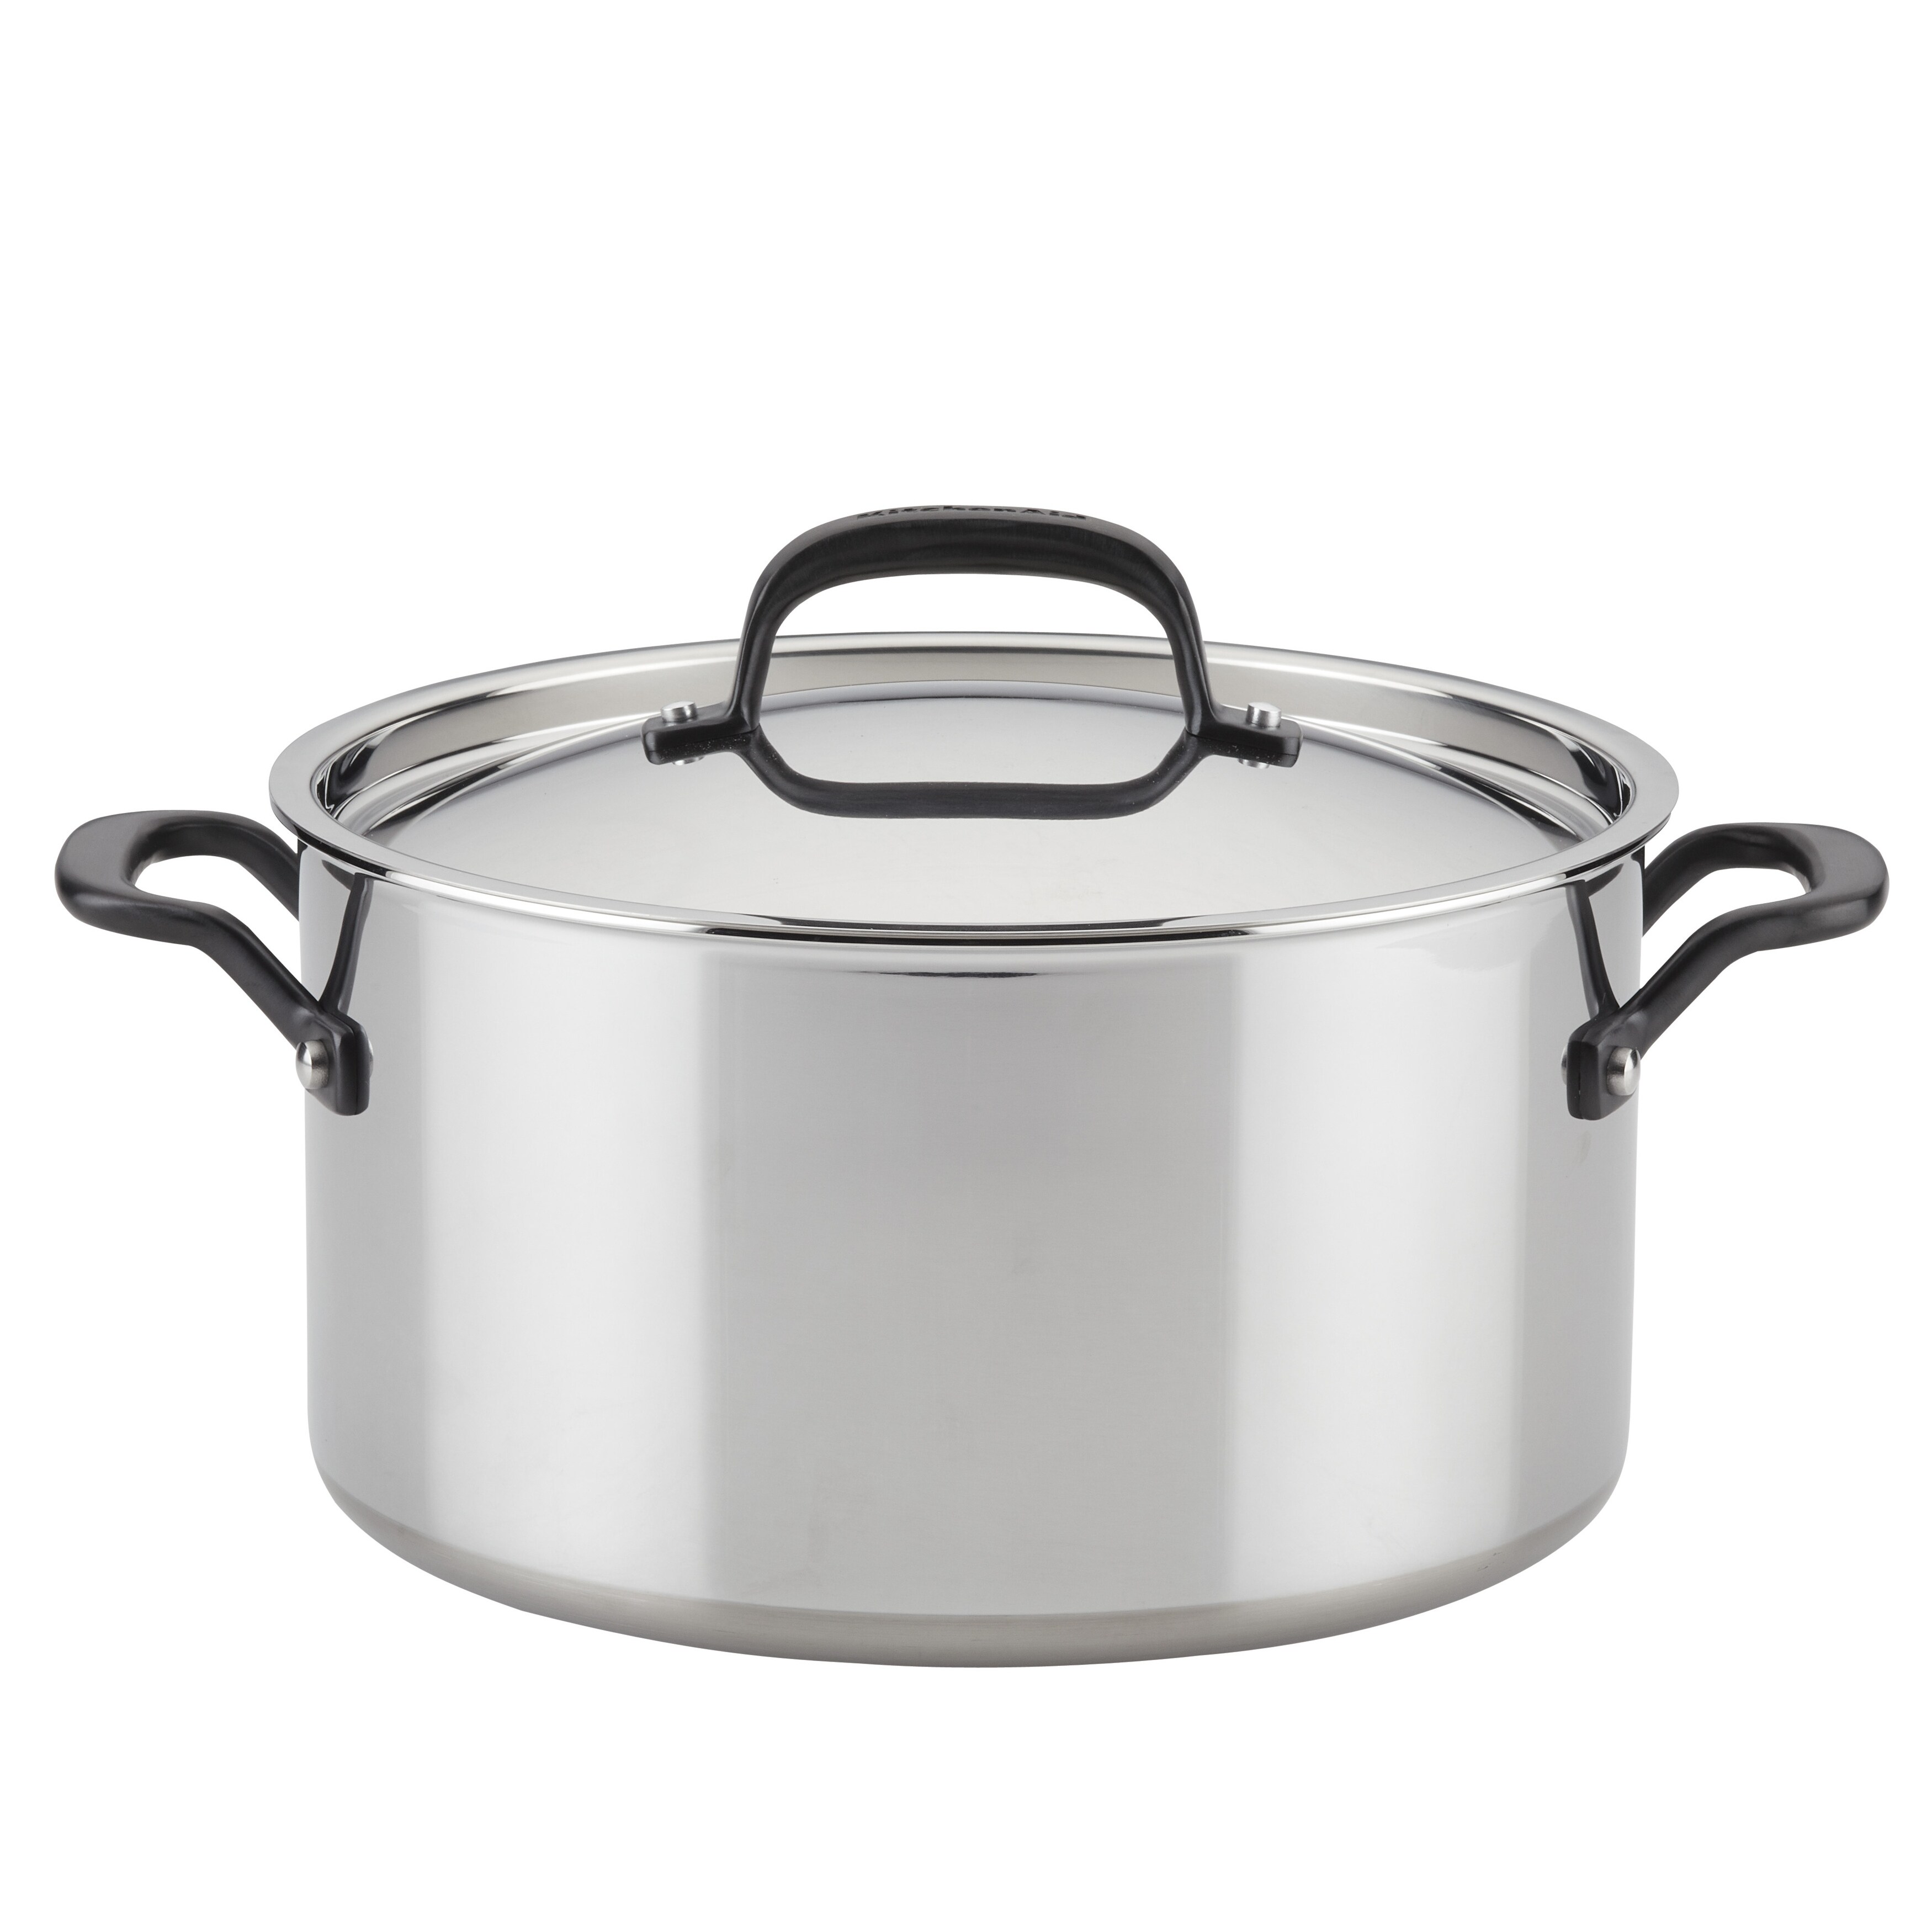 https://ak1.ostkcdn.com/images/products/is/images/direct/1f13794475fd34b8a2284f208288e36c845c9c6d/KitchenAid-5-Ply-Clad-Stainless-Steel-Stockpot-with-Lid%2C-8qt.jpg